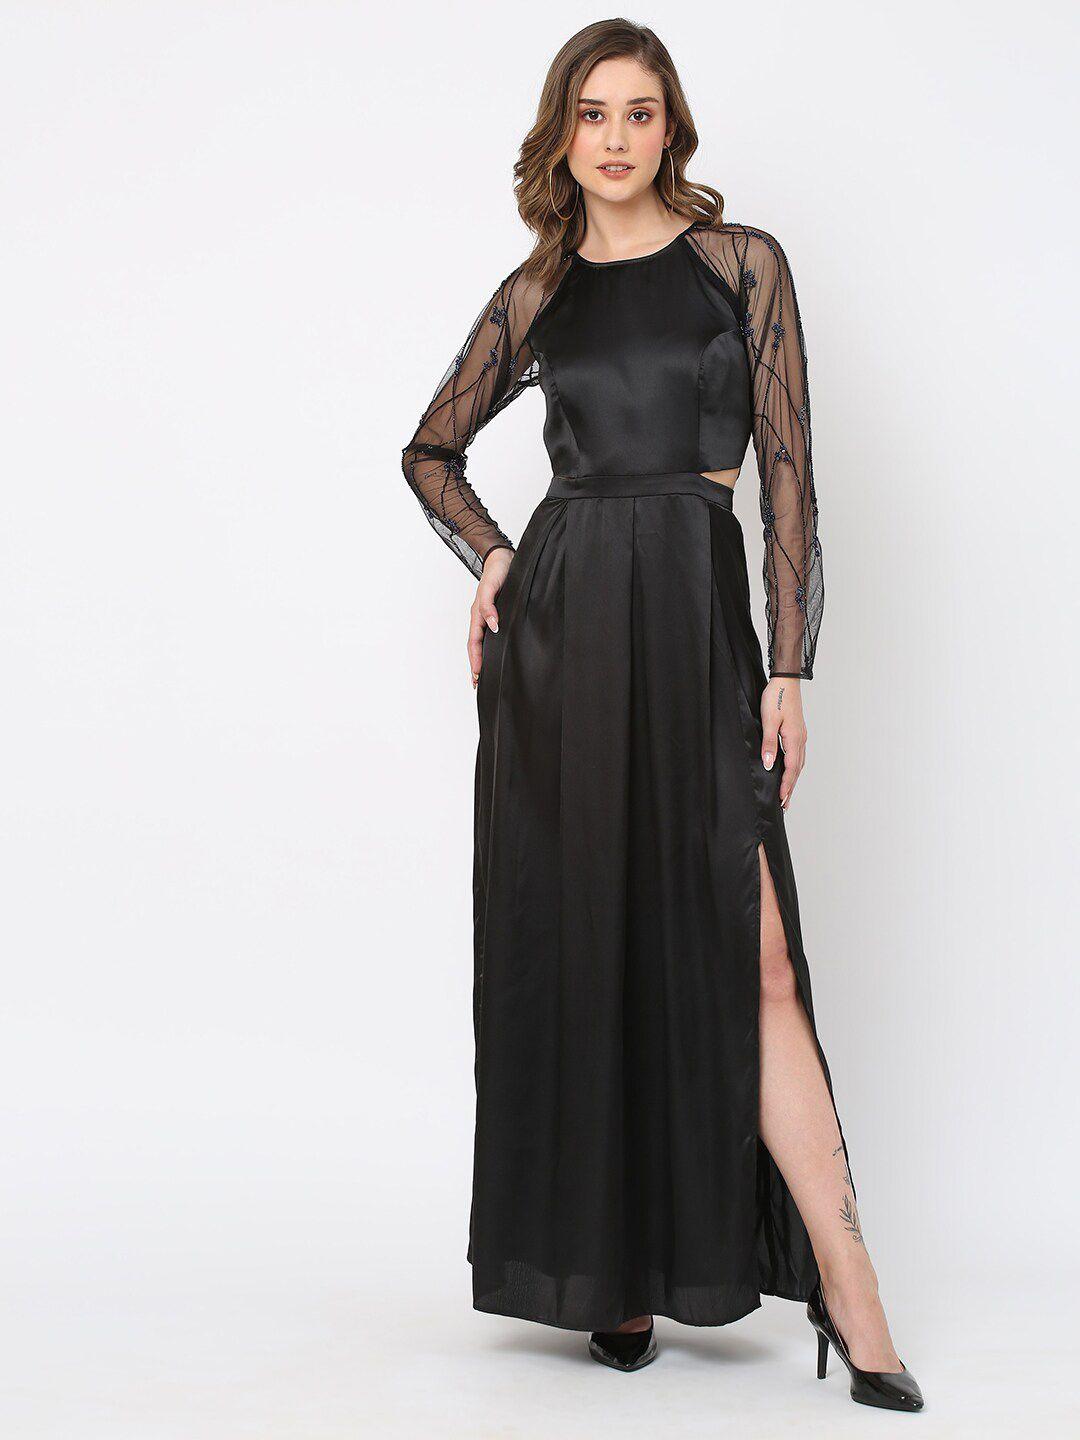 mish-black-embellished-round-neck-cut-outs-fit-&-flare-maxi-dress